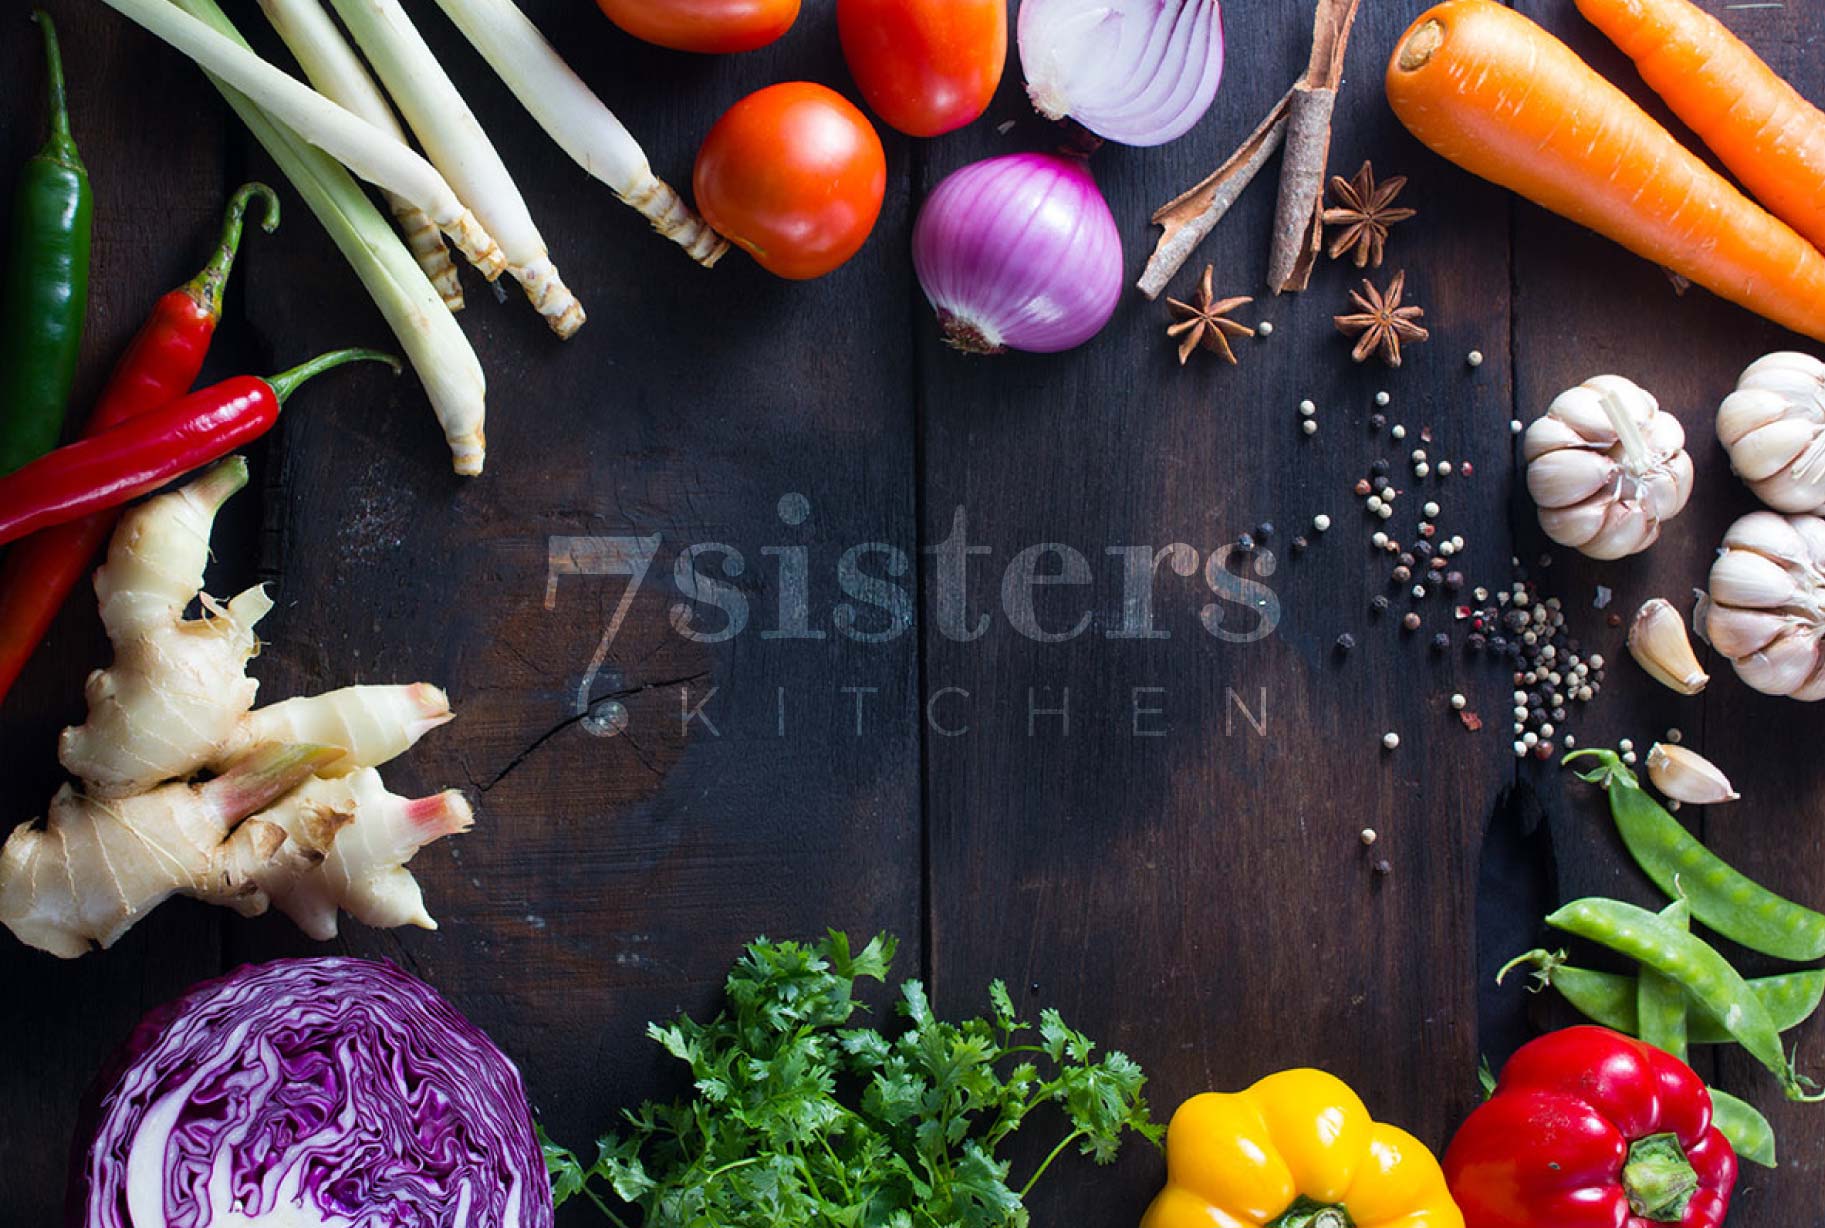 7 Sisters Kitchen